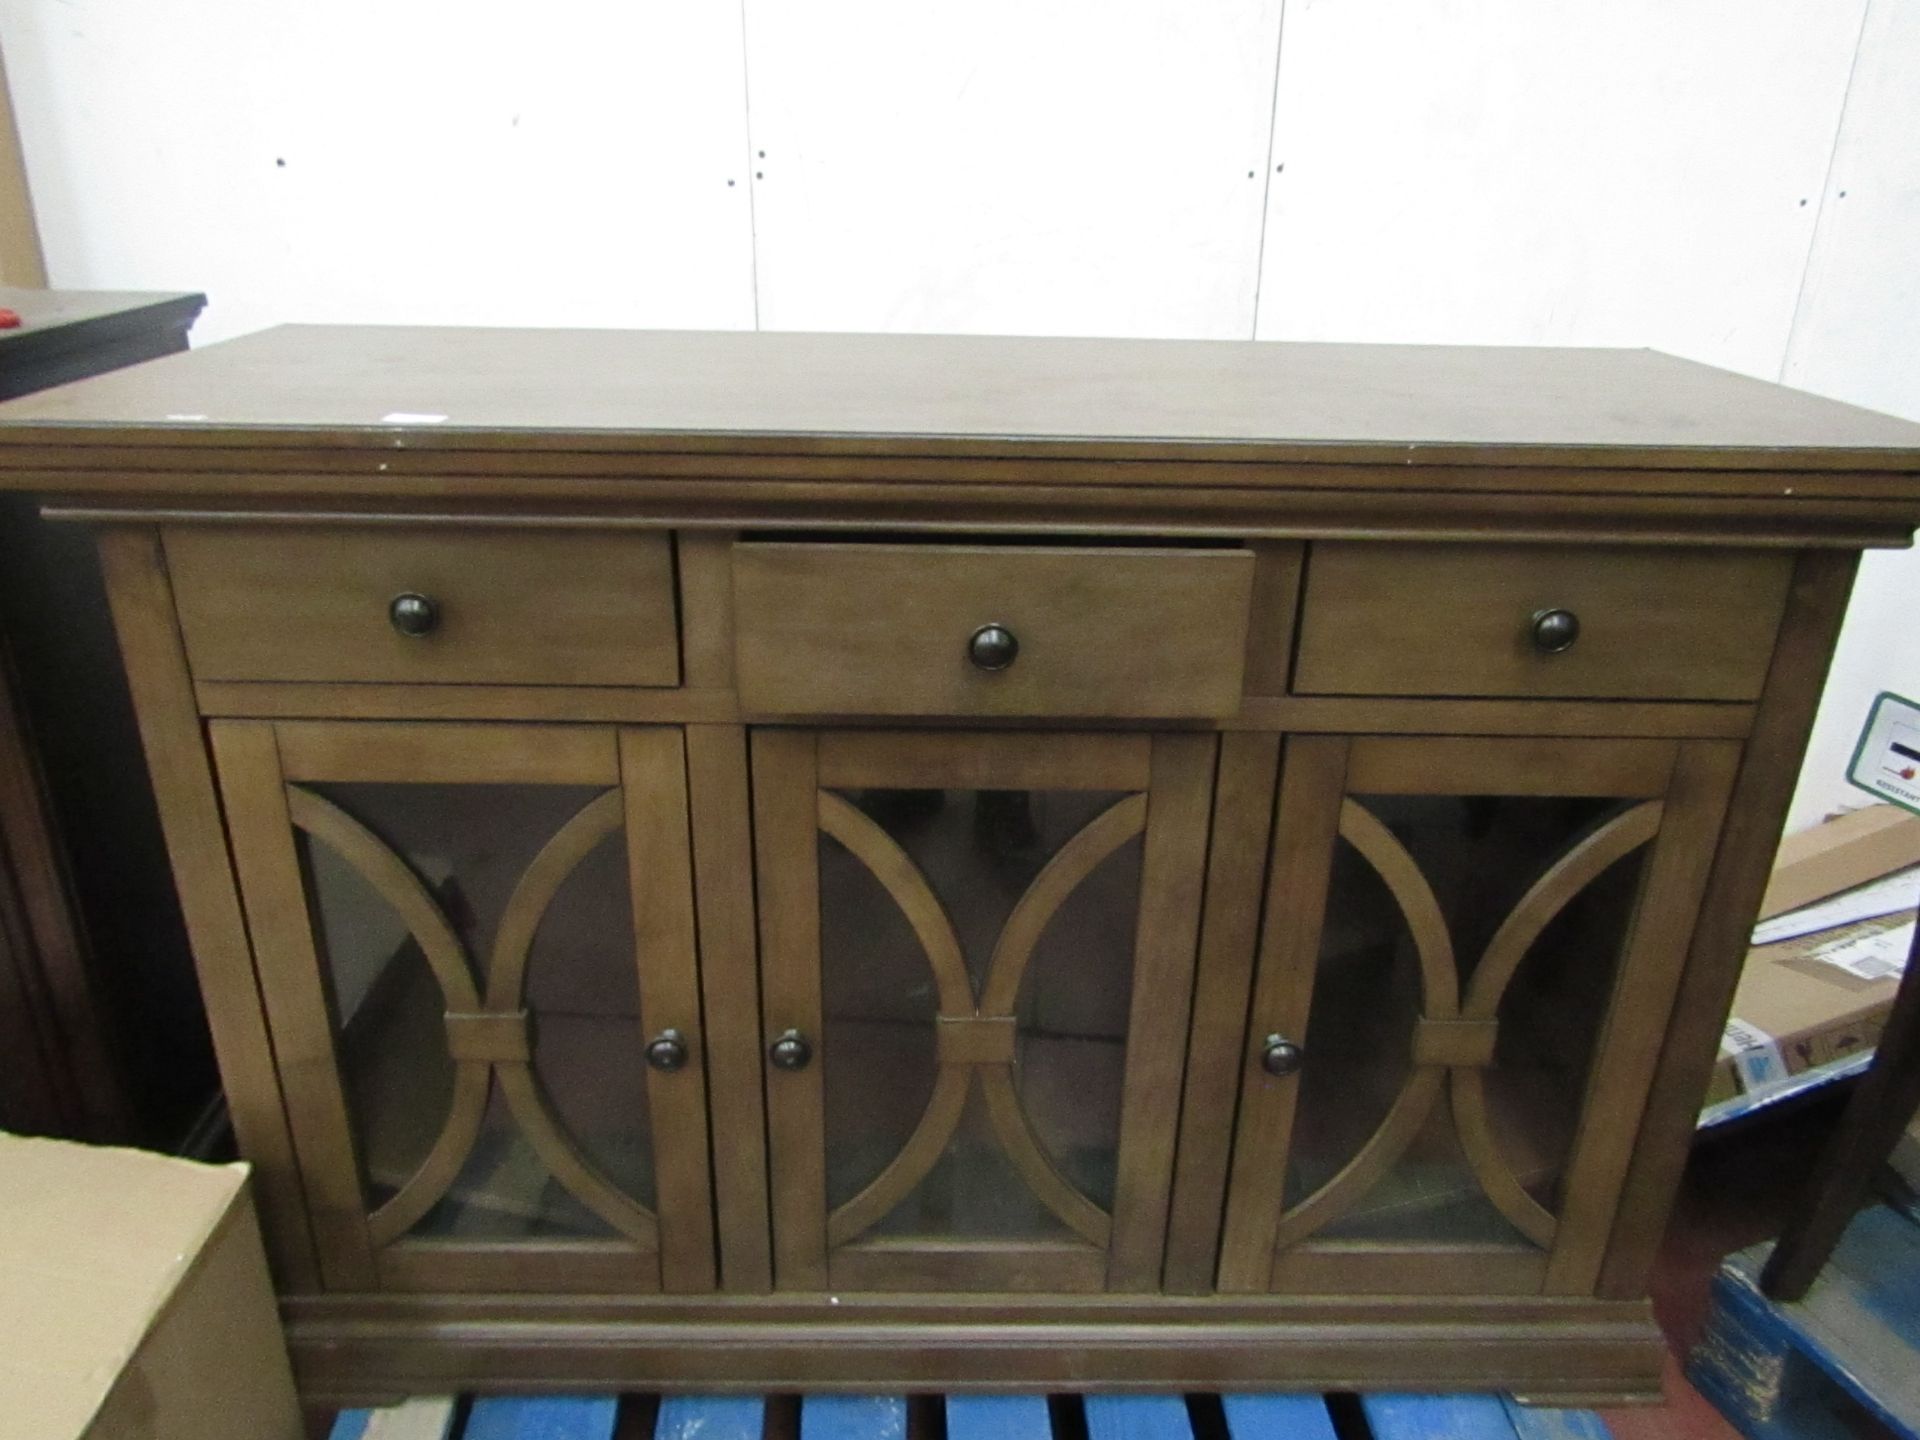 Bayside 3 door, 3 drawer sideboard unit, has a few marks on top.